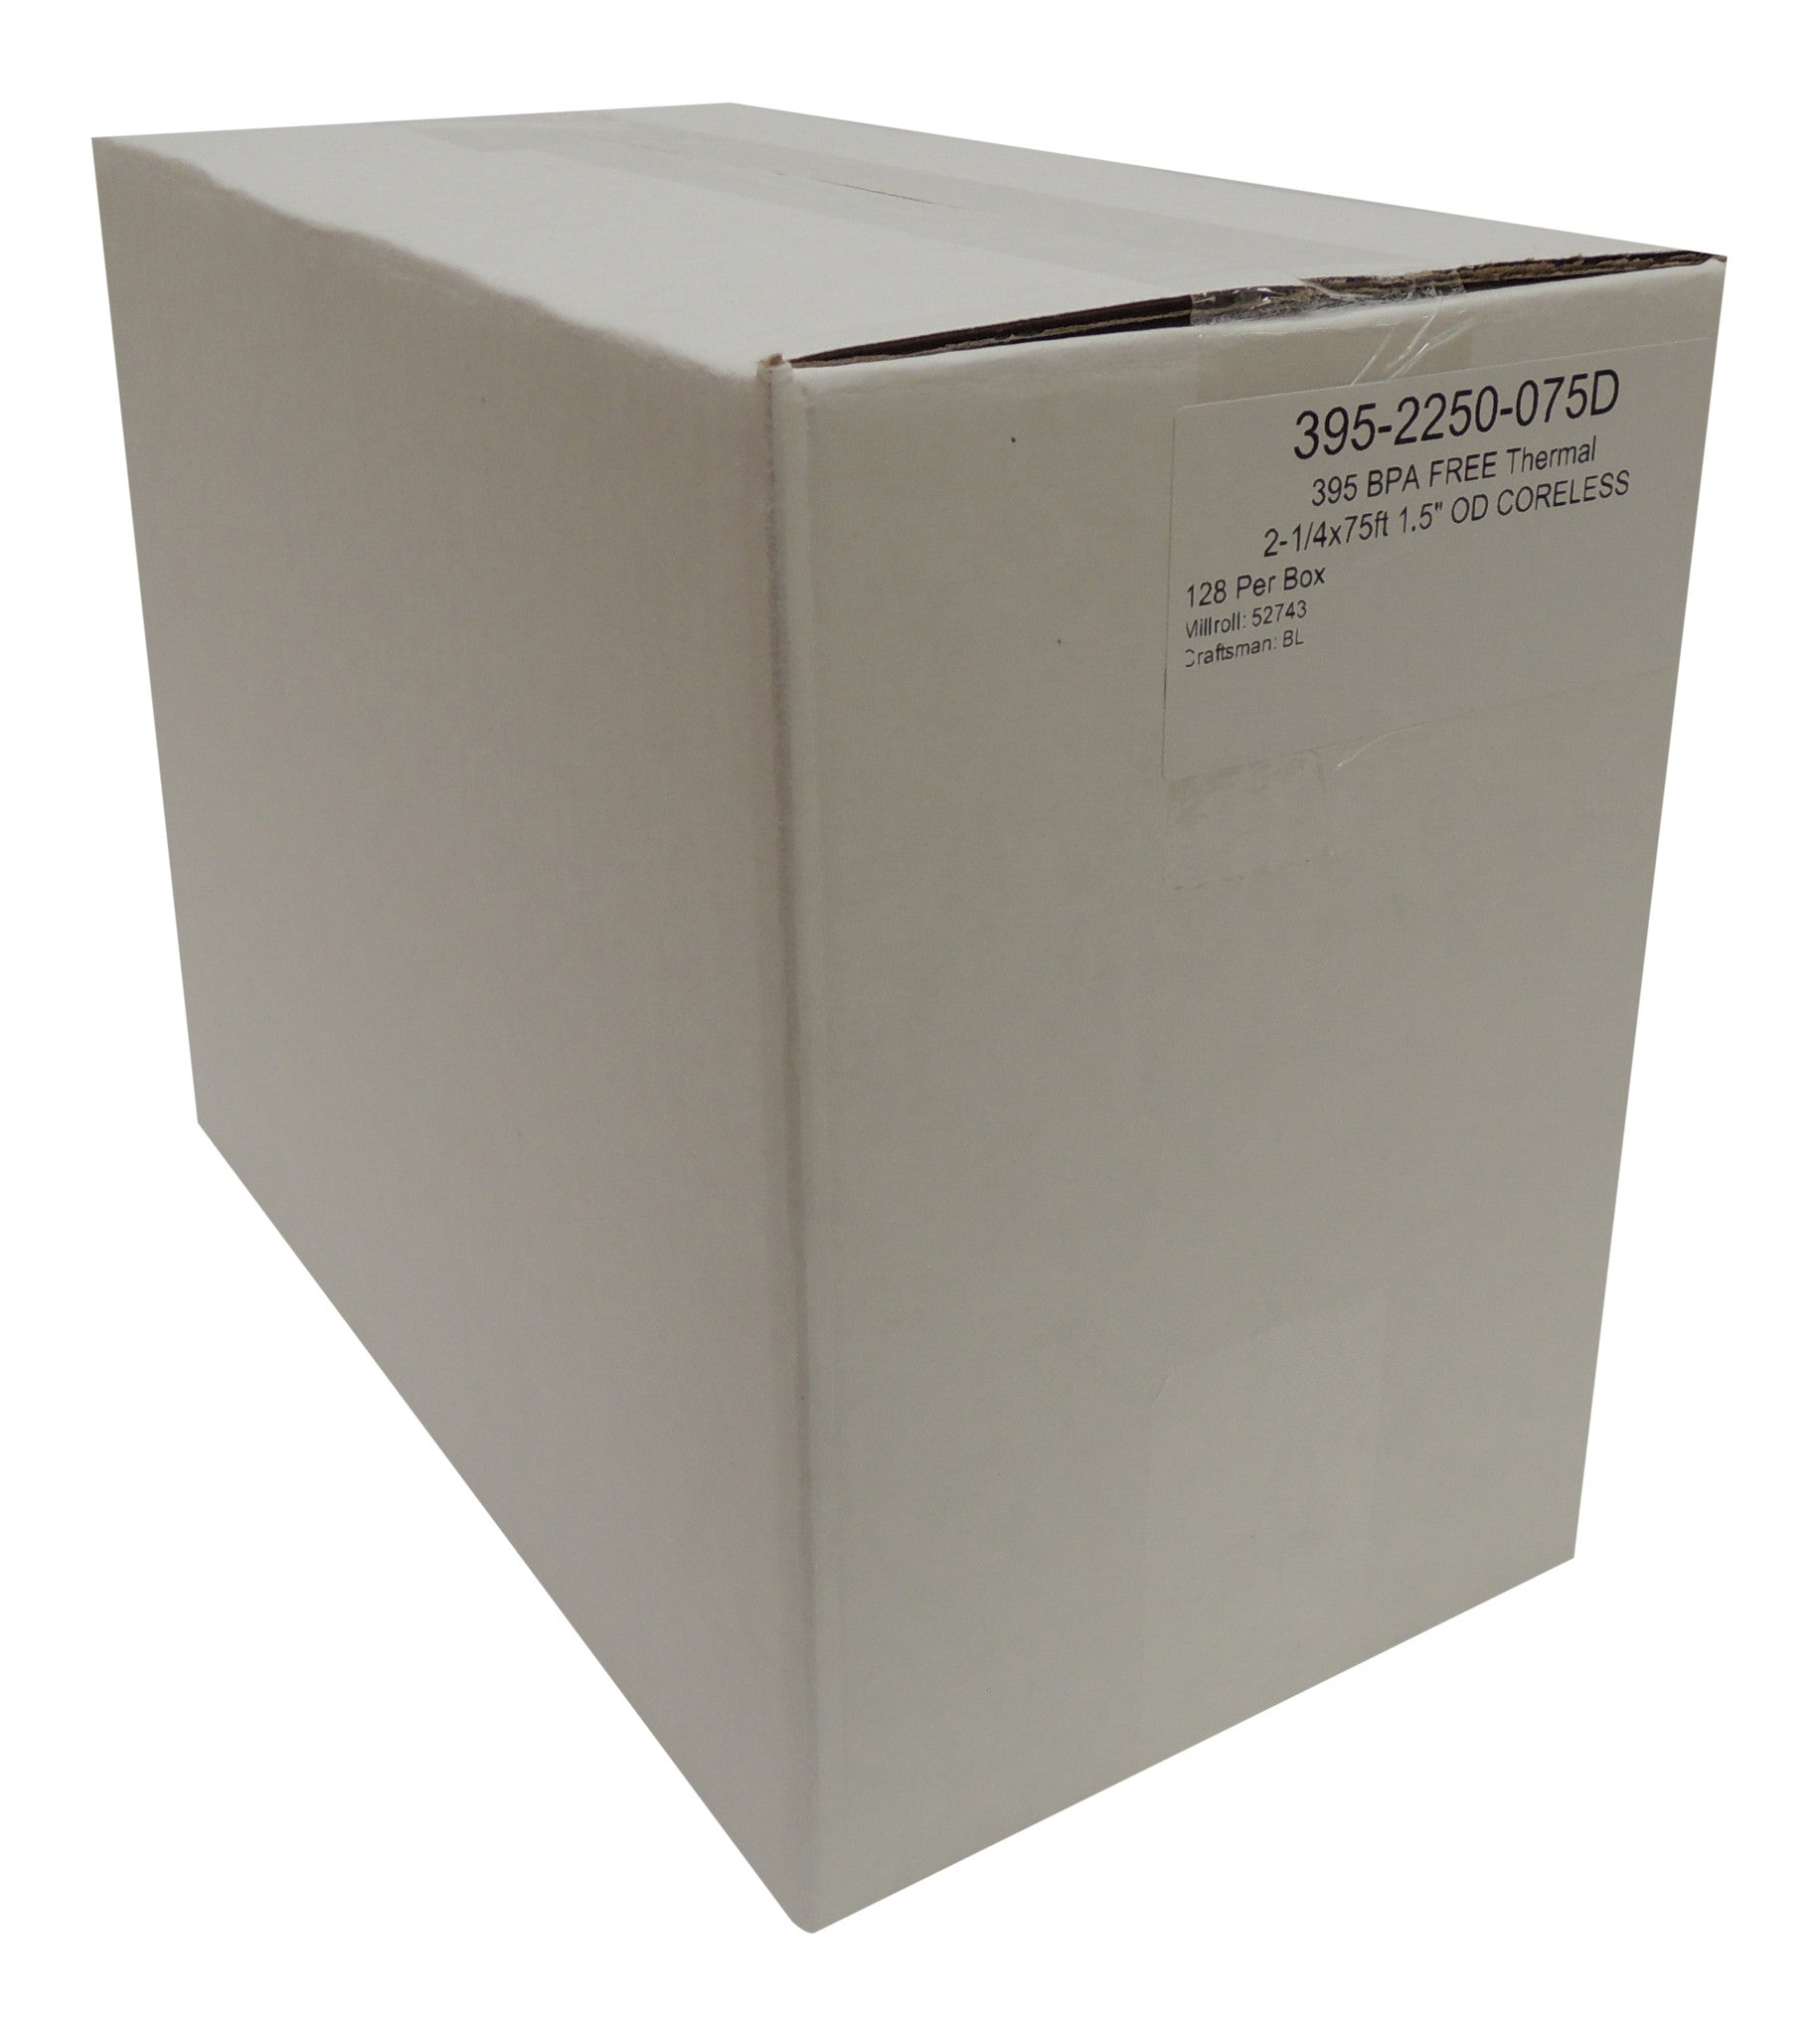 POS1 Thermal Paper 2 1/4 x 75 ft CORELESS BPA Free 128 rolls - Pallet 85 cases